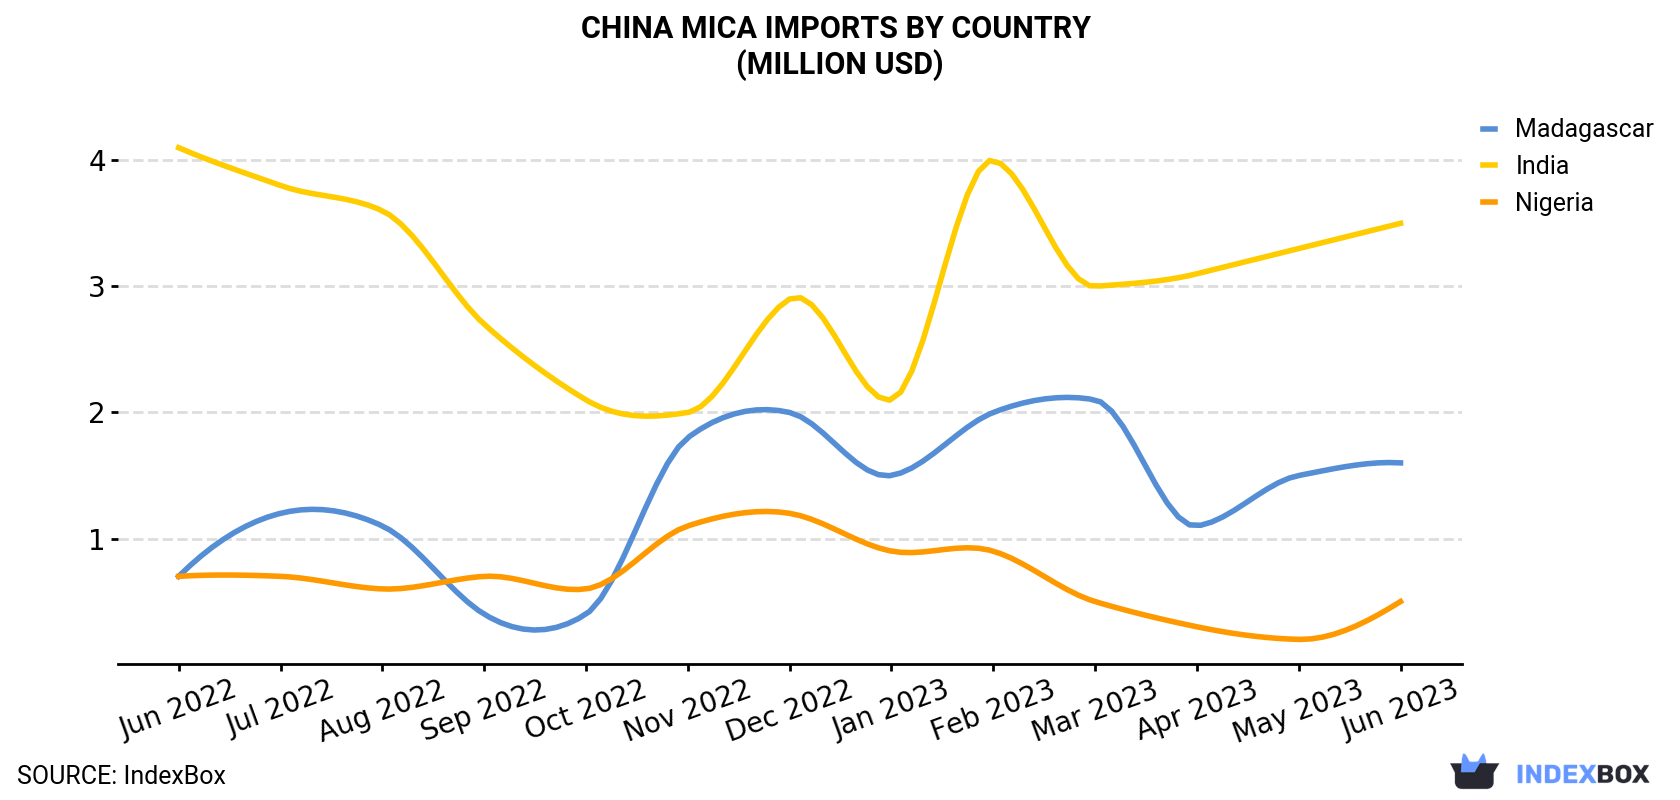 China Mica Imports By Country (Million USD)